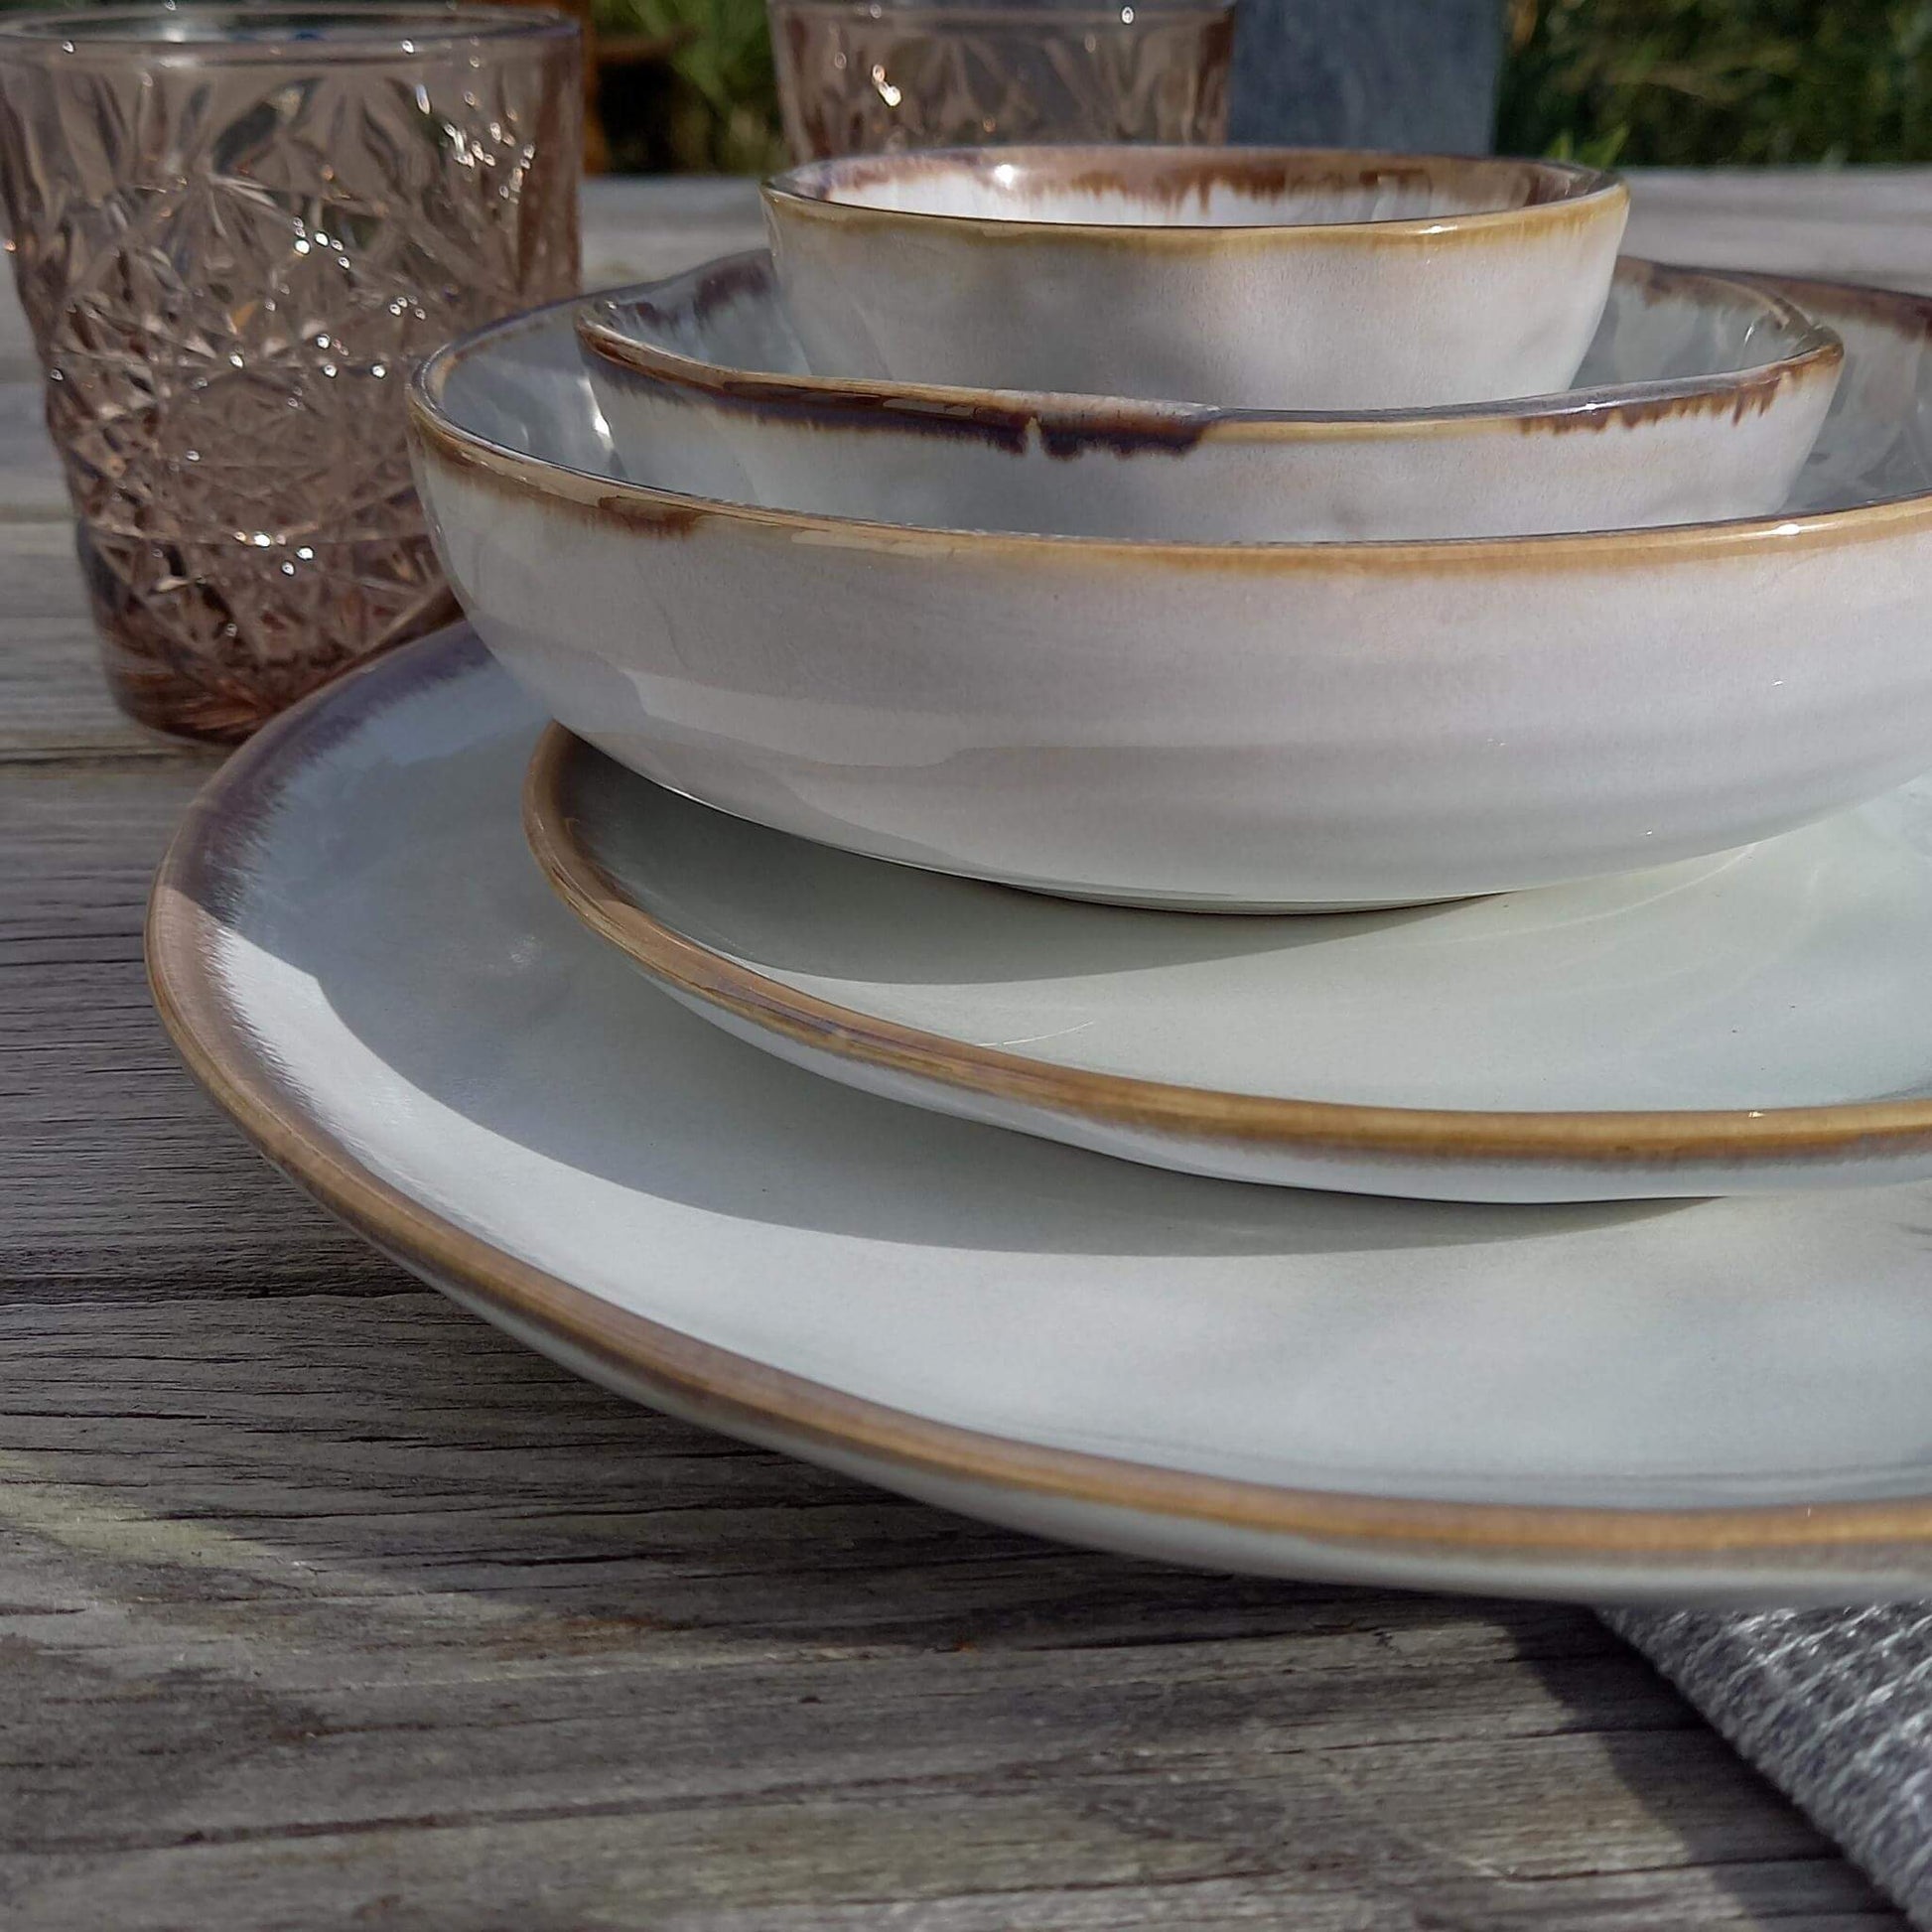 Biarritz - mother-of-pearl white bowl 19 cm - Unik by Nature